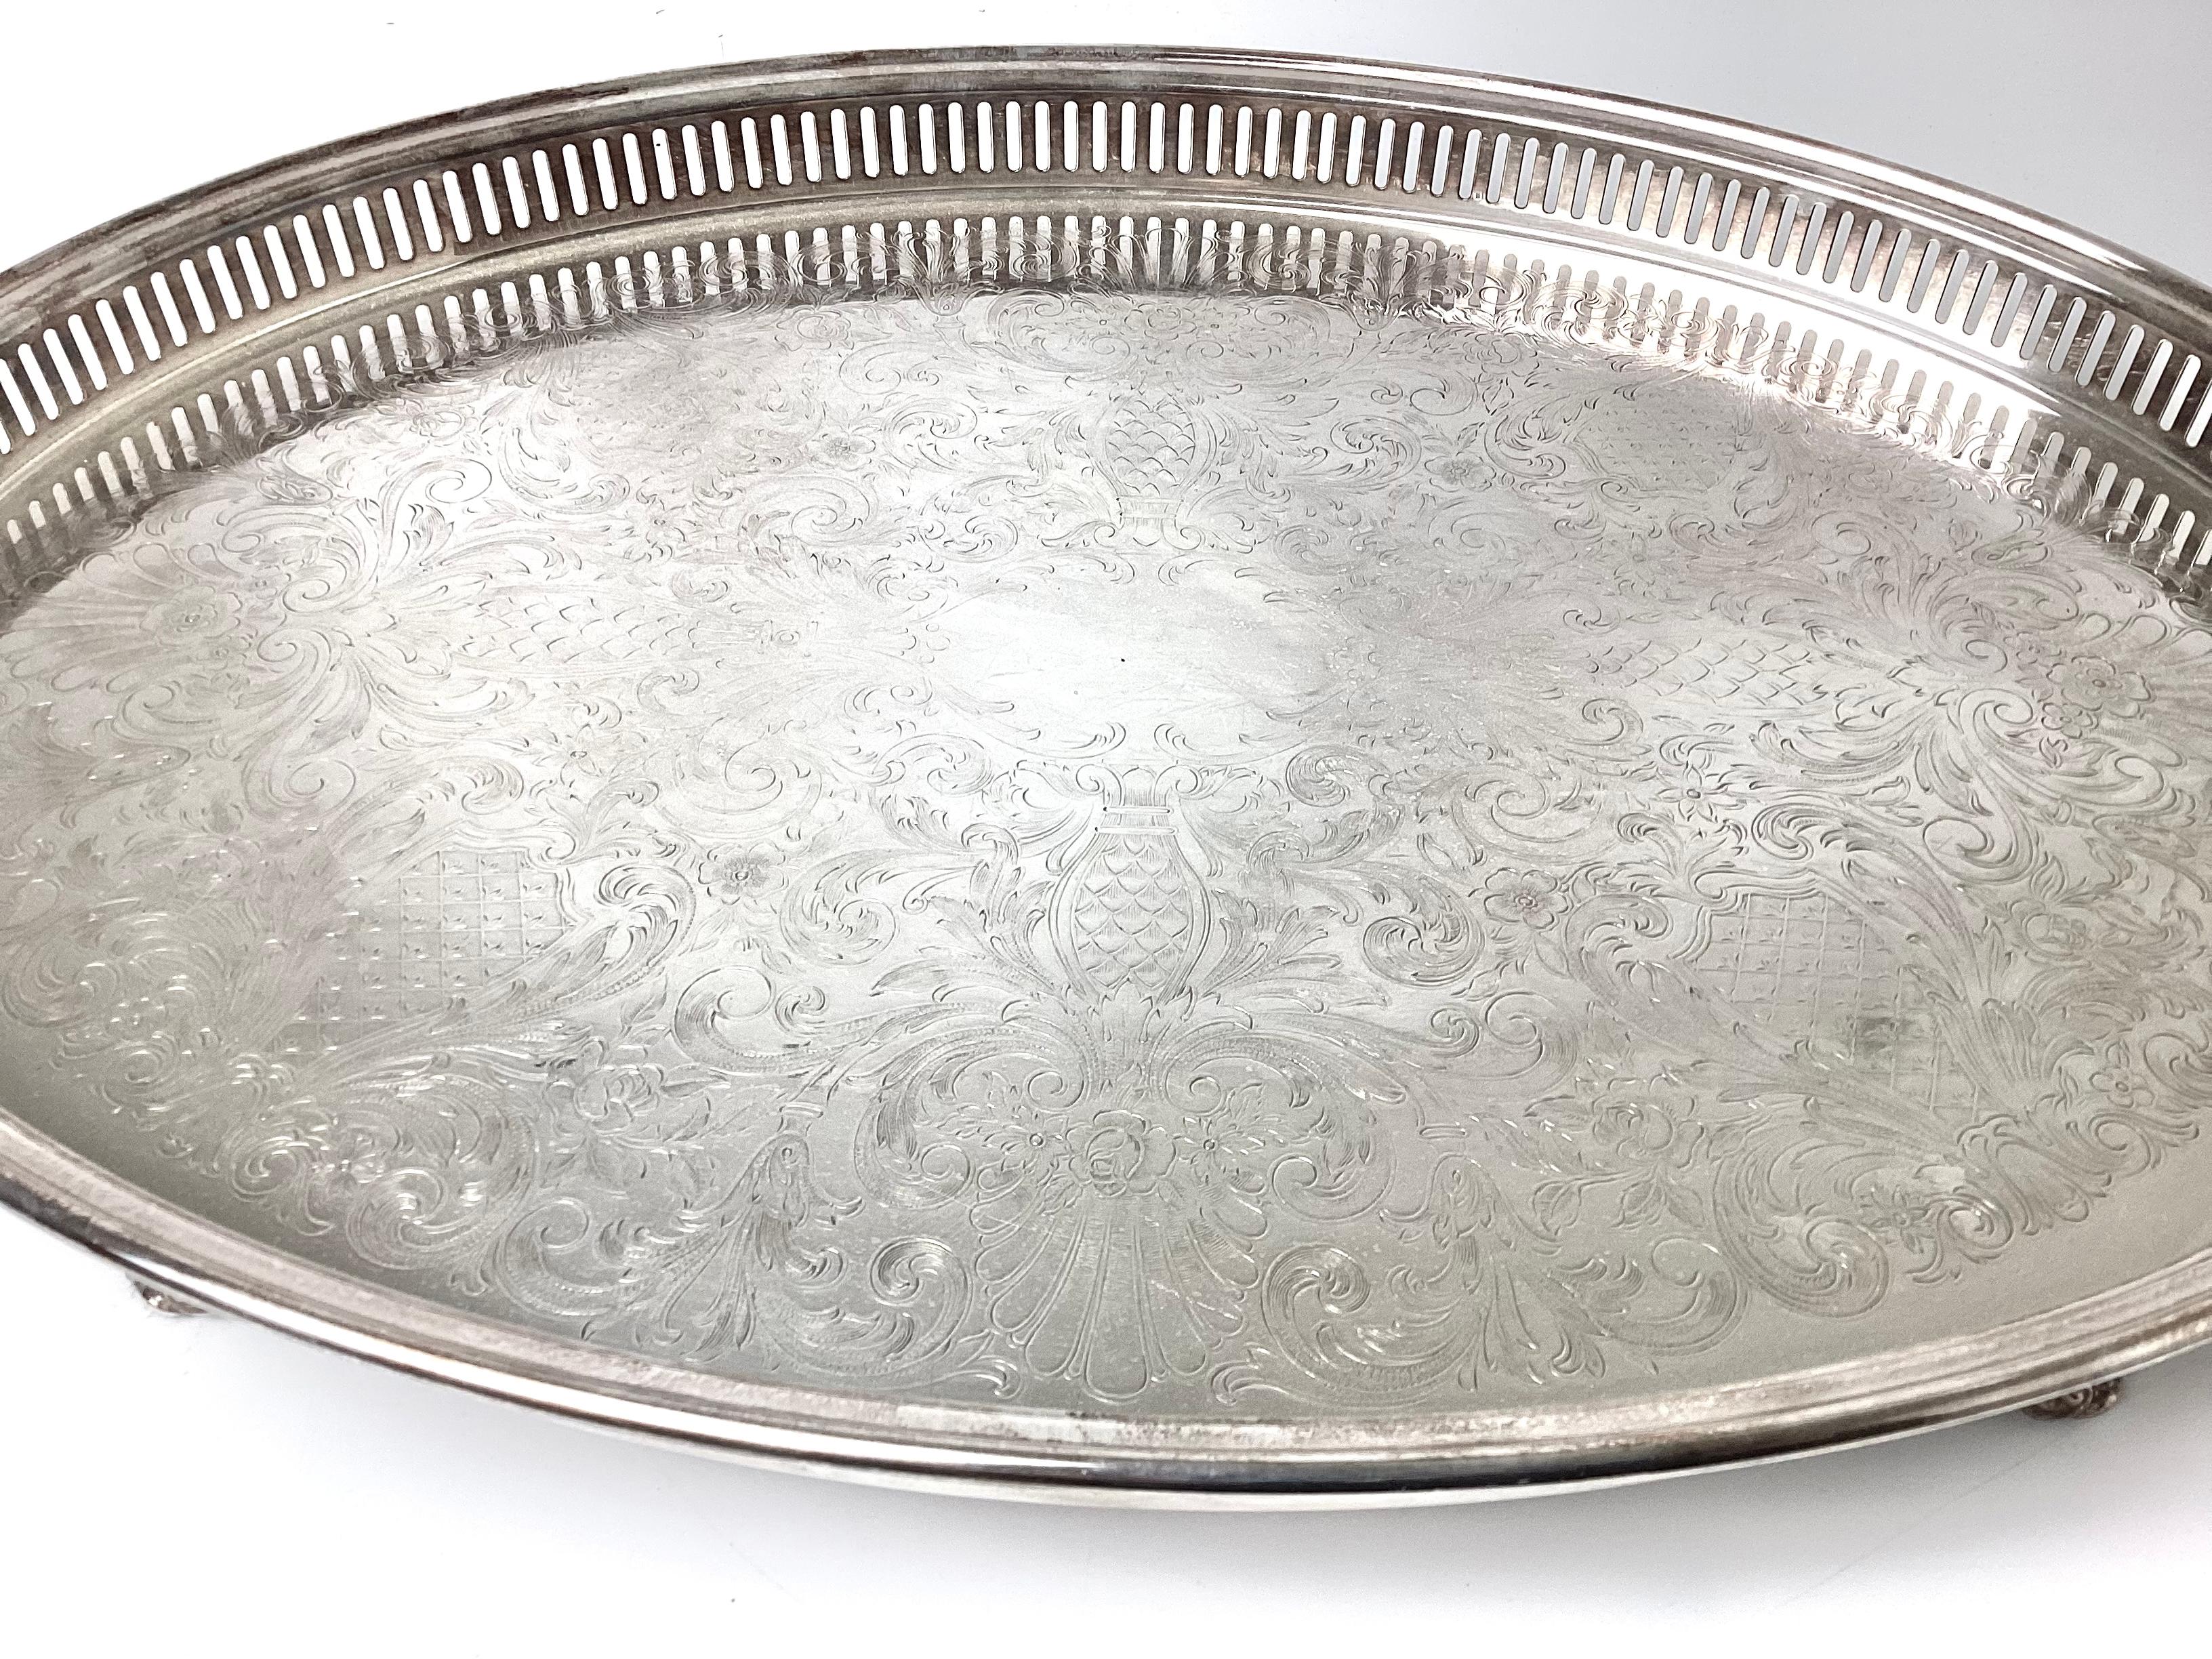 Large antique oval silver plated gallery serving drinks tray by W&S Blackinton. 25